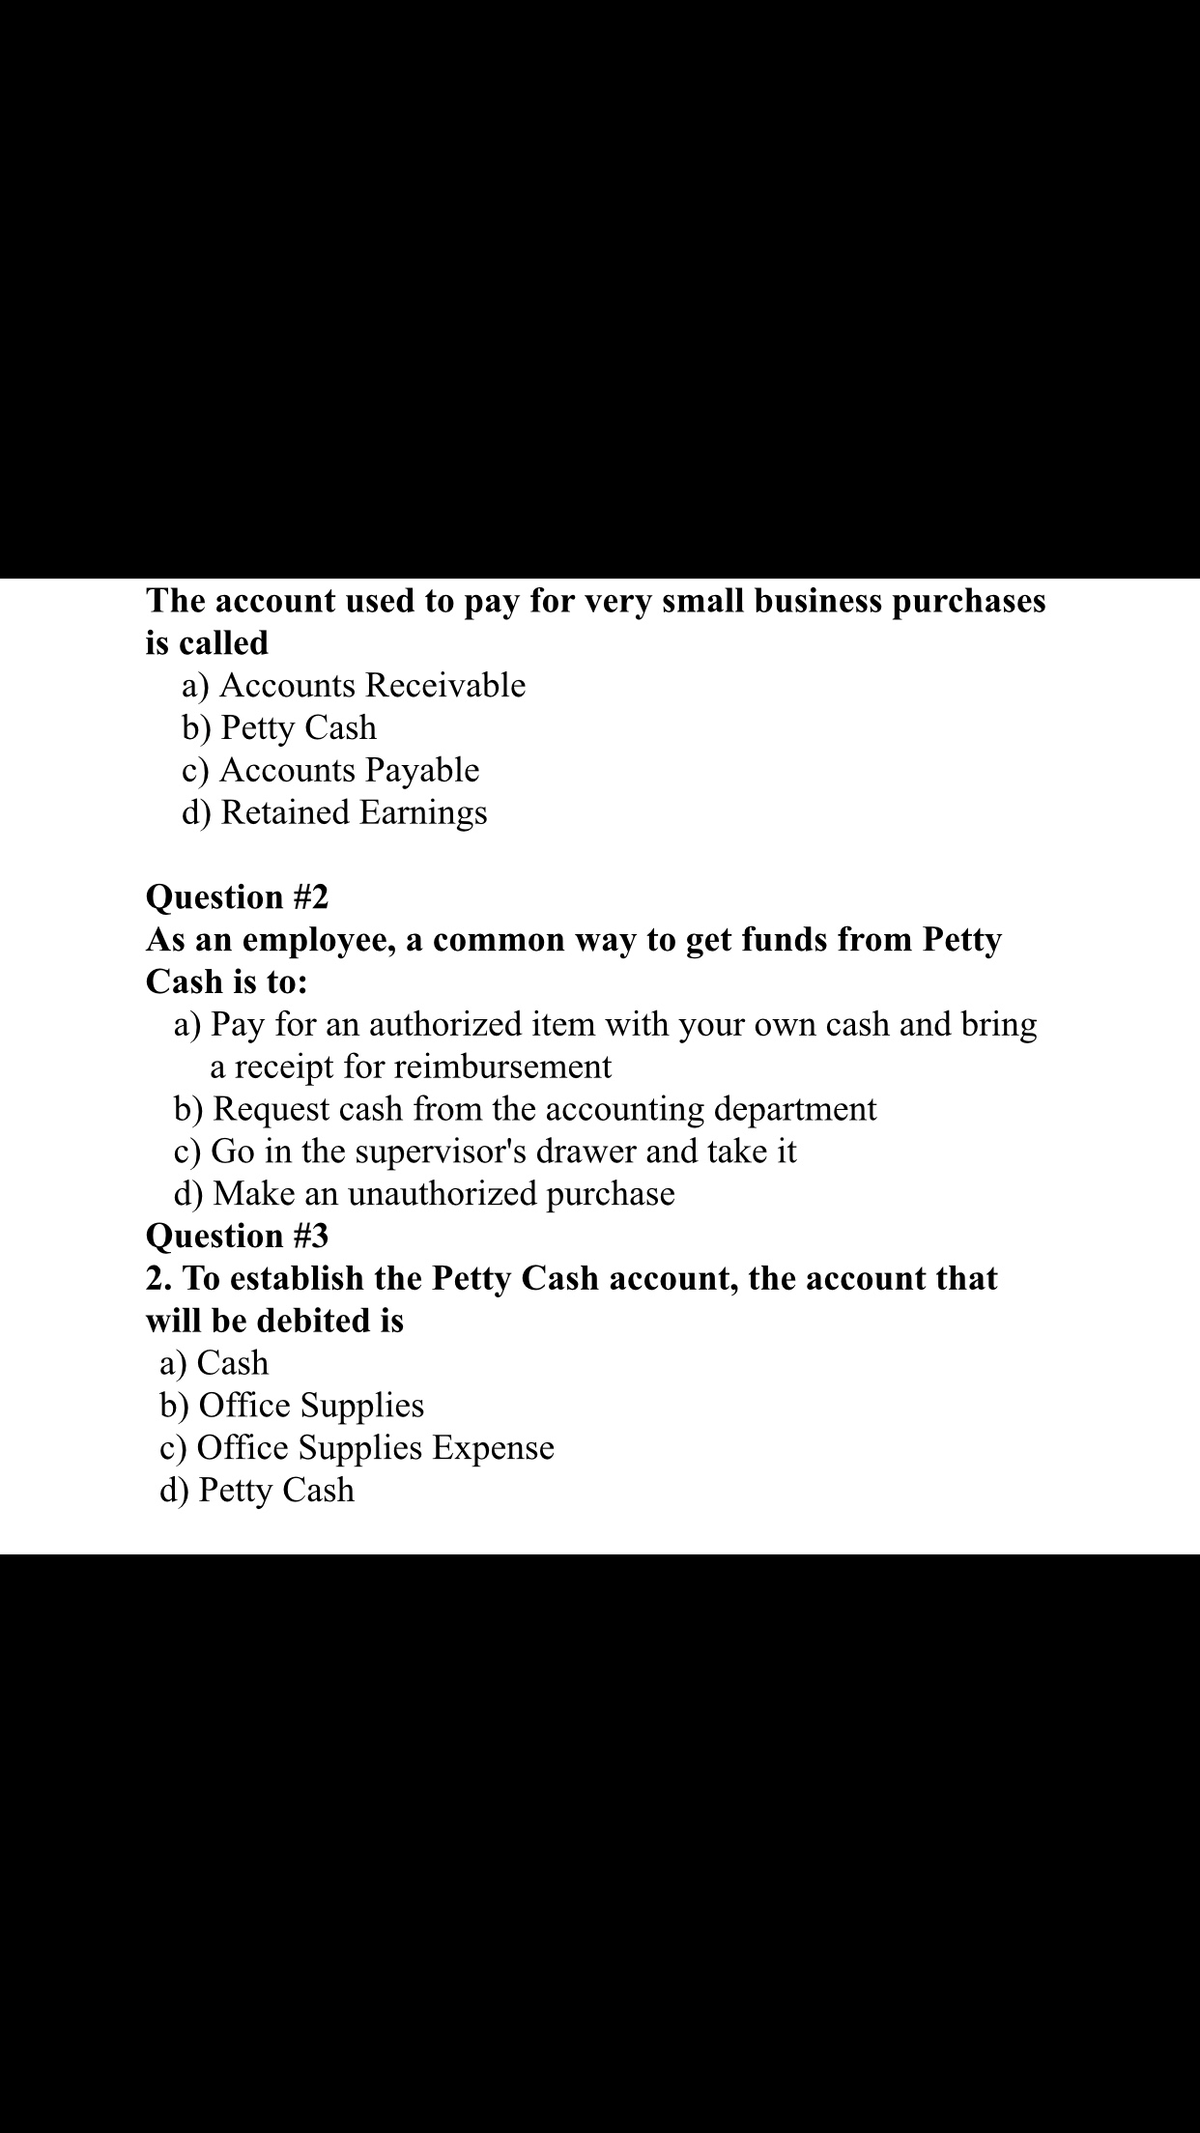 The account used to pay for very small business purchases
is called
a) Accounts Receivable
b) Petty Cash
c) Accounts Payable
d) Retained Earnings
Question #2
As an employee, a common way to get funds from Petty
Cash is to:
a) Pay for an authorized item with your own cash and bring
a receipt for reimbursement
b) Request cash from the accounting department
c) Go in the supervisor's drawer and take it
d) Make an unauthorized purchase
Question #3
2. To establish the Petty Cash account, the account that
will be debited is
a) Cash
b) Office Supplies
c) Office Supplies Expense
d) Petty Cash